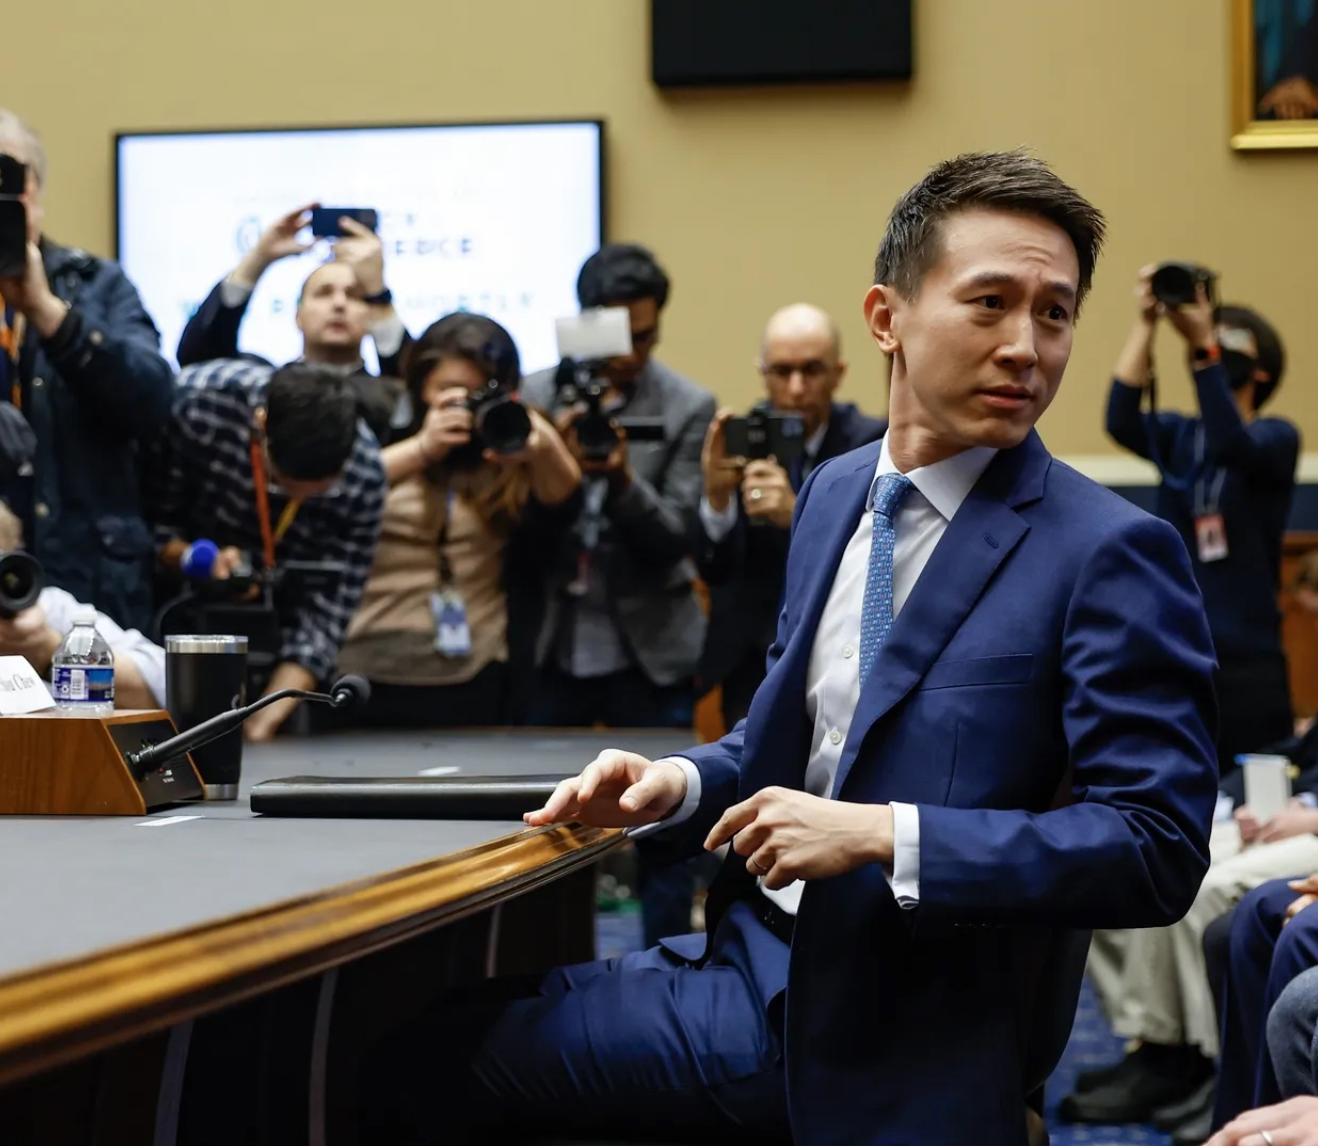 TikTok CEO Shou Zi Chew about to testify before the House Energy and Commerce Committee in March 2023.